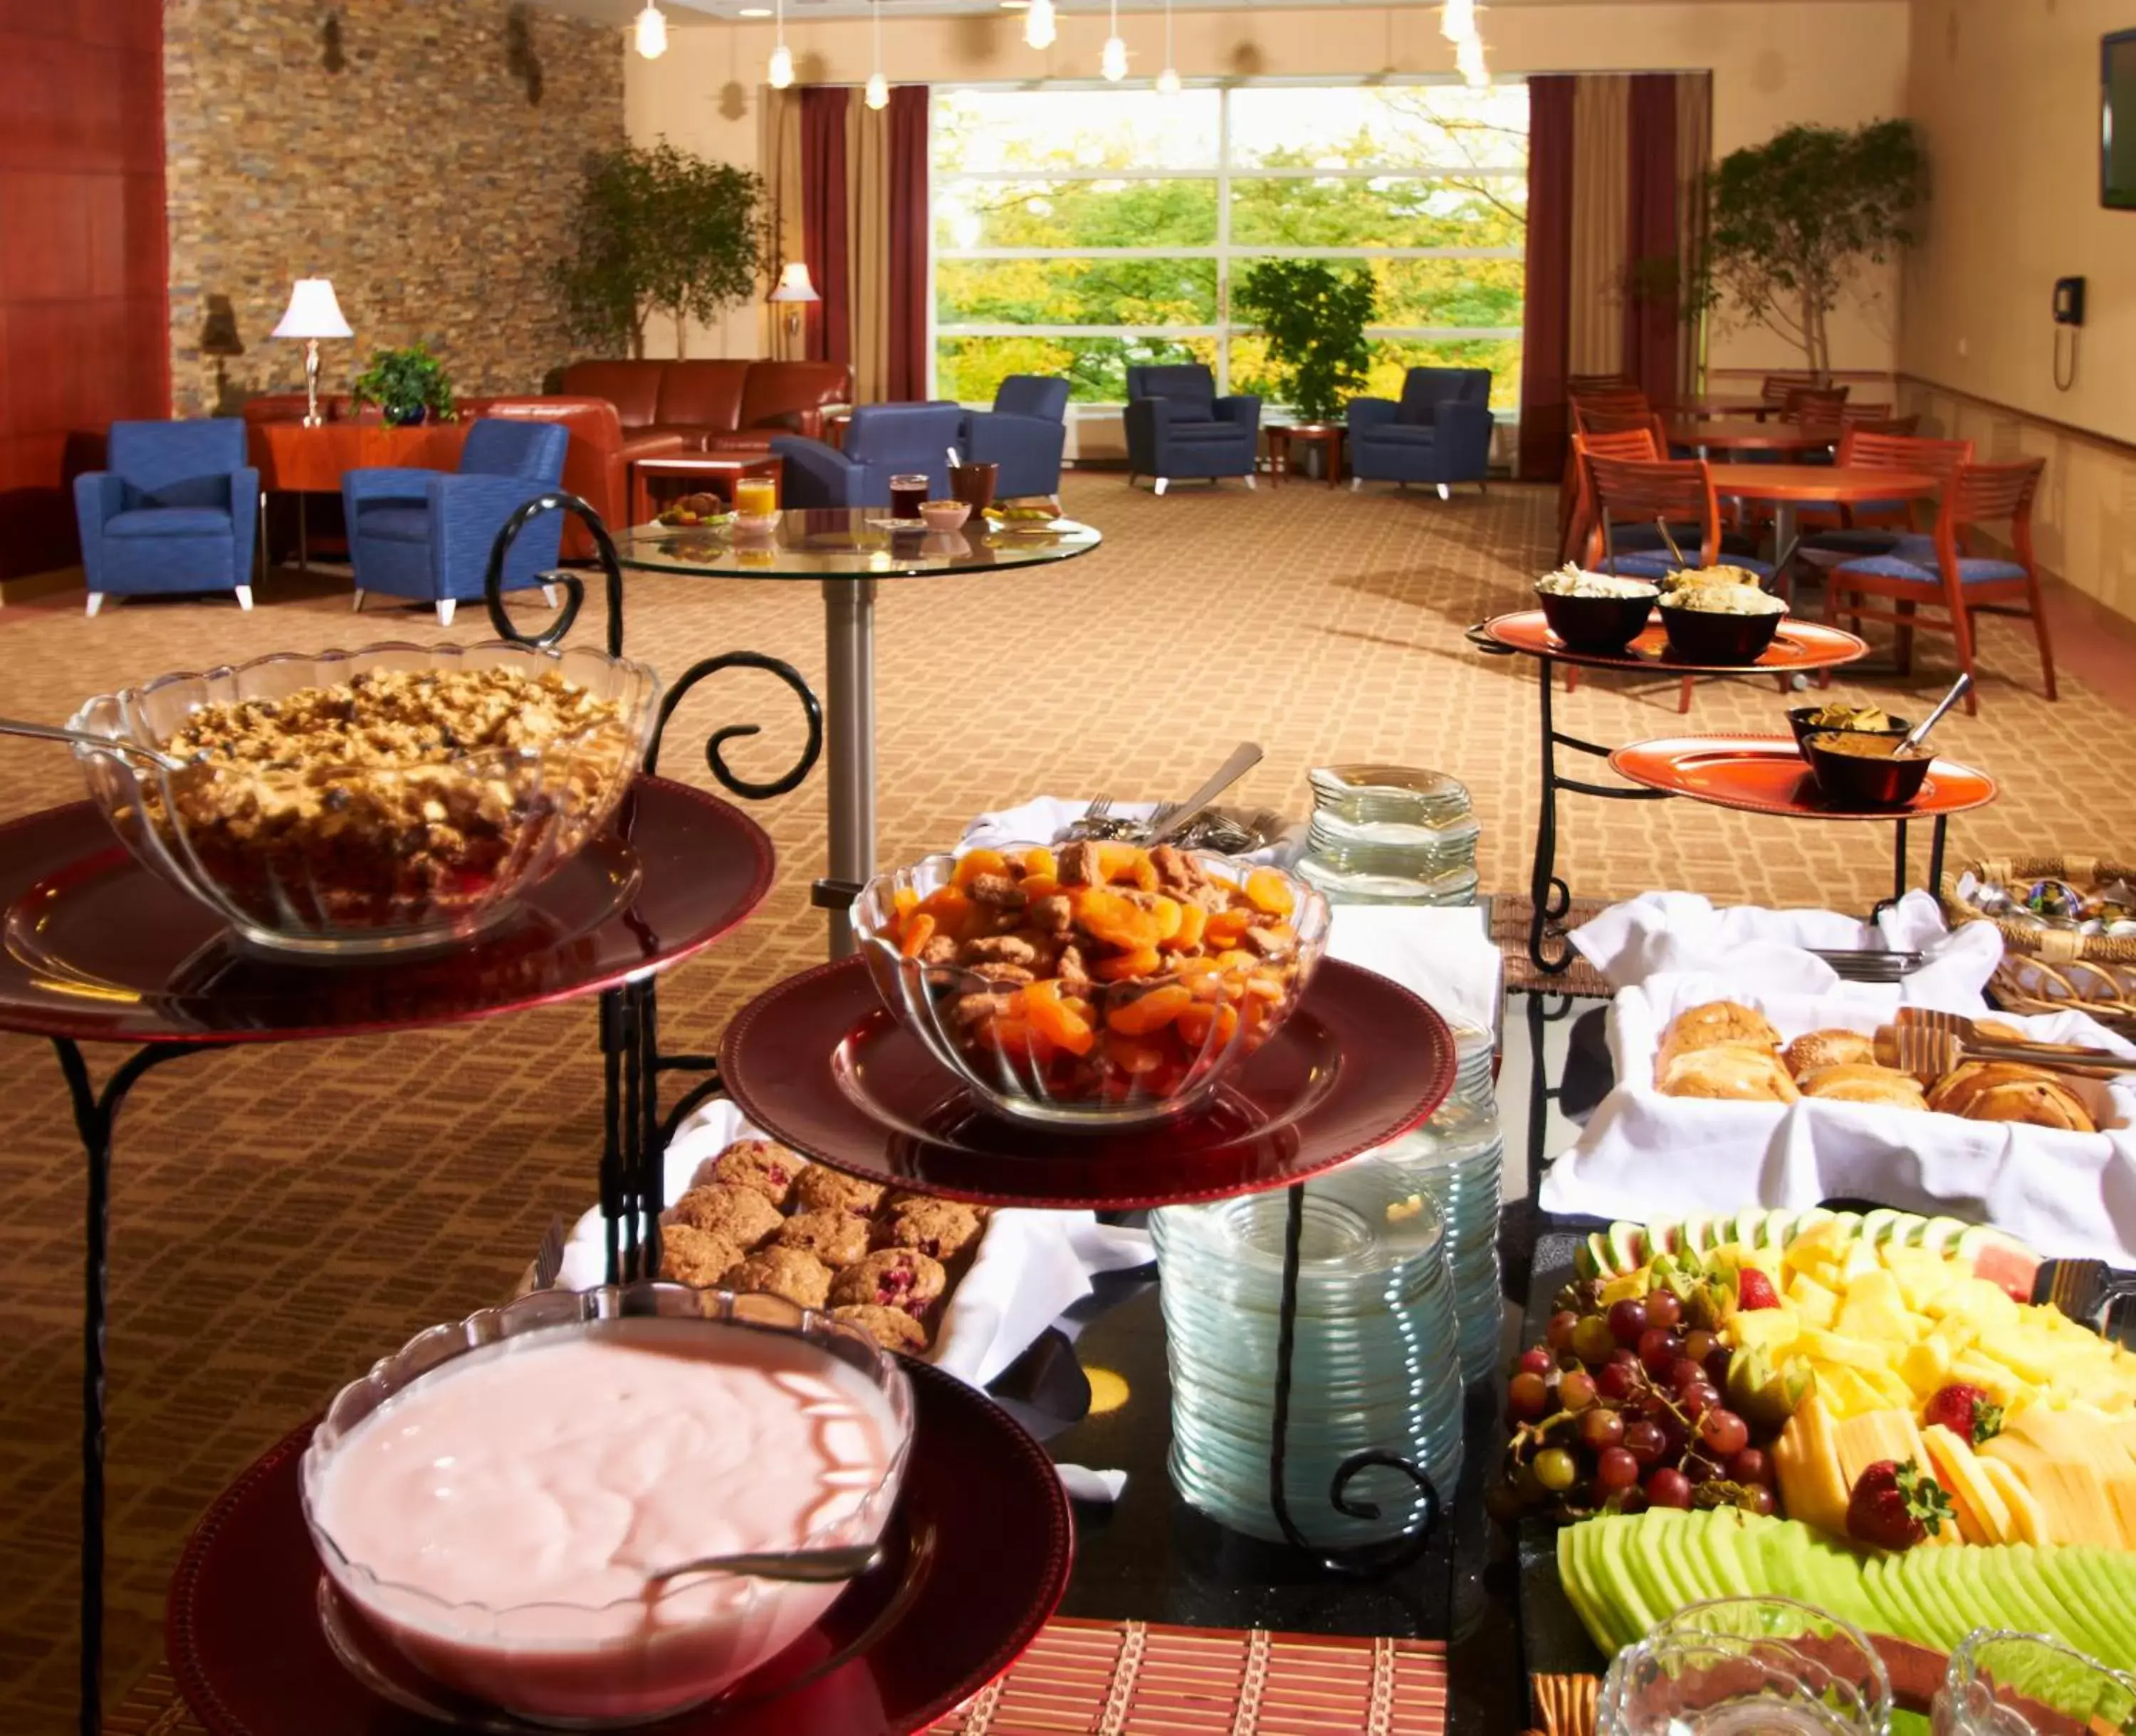 Banquet/Function facilities in The Penn Stater Hotel and Conference Center